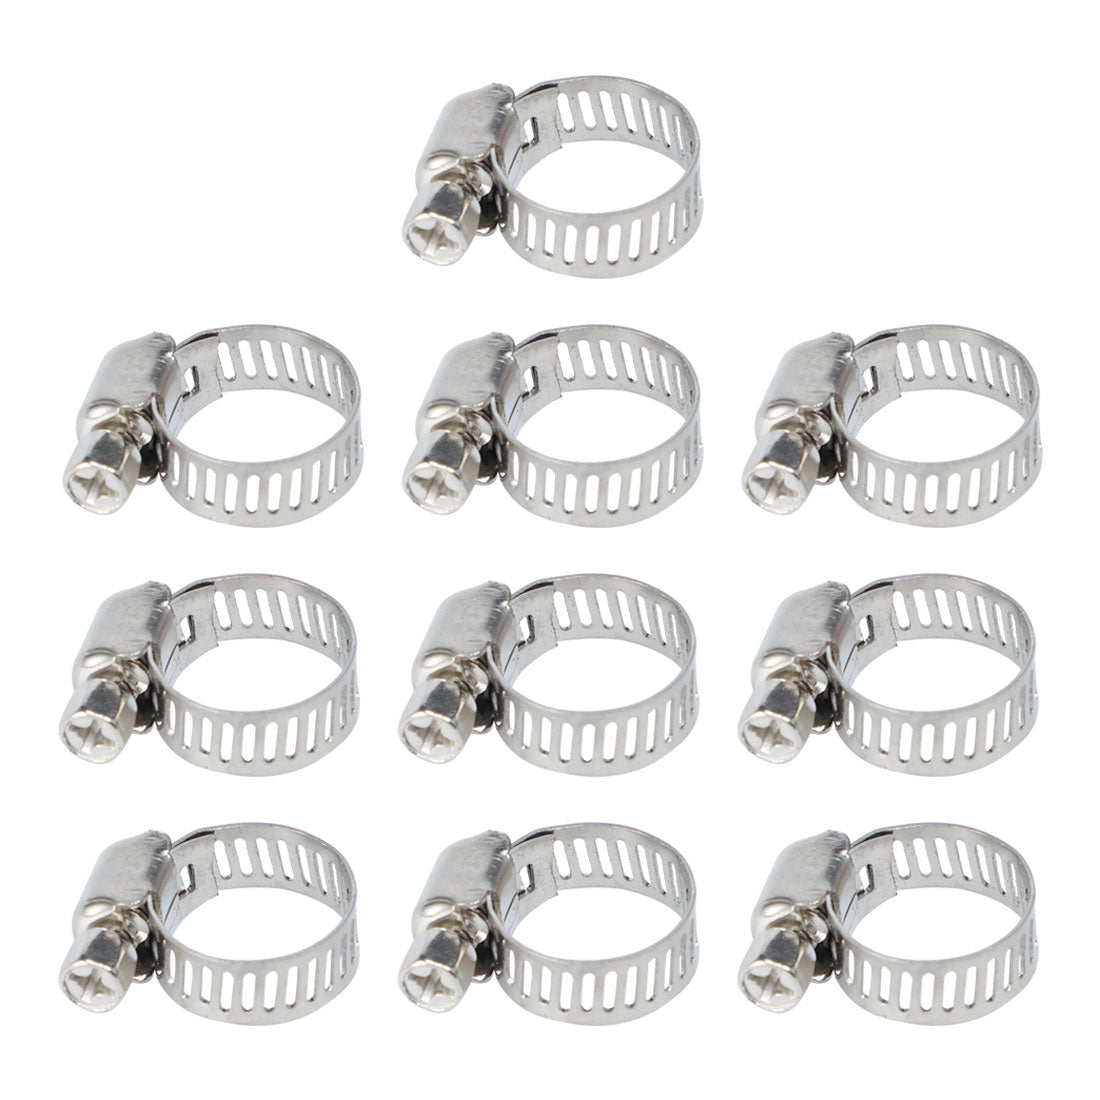 uxcell Uxcell 3/8-5/8 Inch Dia 10pcs 201 Stainless Steel Adjustable  Gear Clip Clamping Hose Clamp